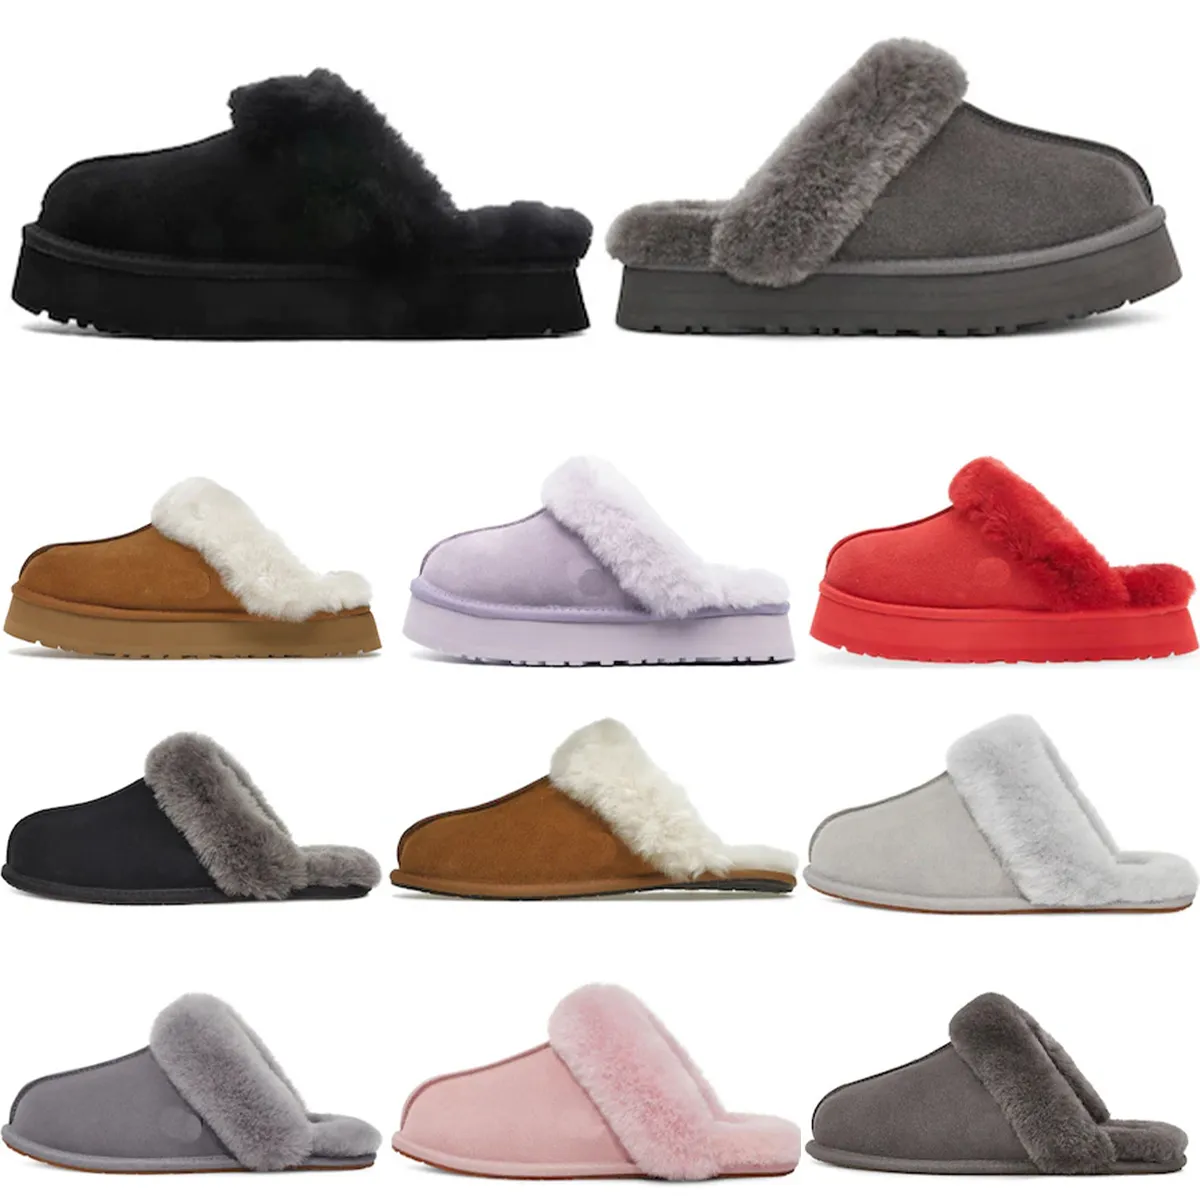 Designer Snow Boots Australia Mini Platform Boot Women Tazz Slippers Classic Suede Slides Winter Wool Warm Booties Fur Sheep Skin Shoes Ankle Bootes